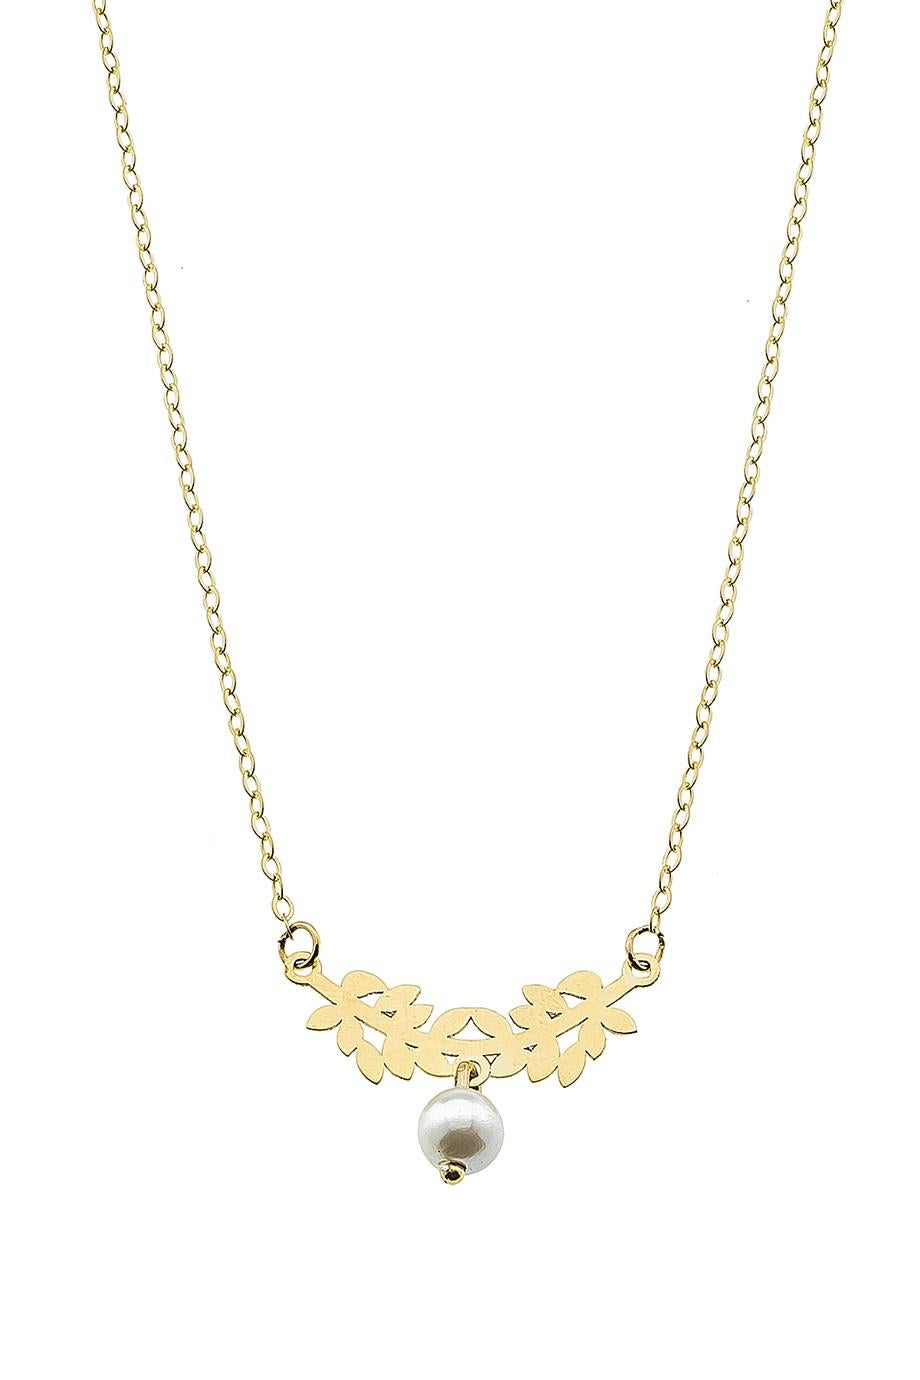 Taille pampille Collier en or 14k avec perle